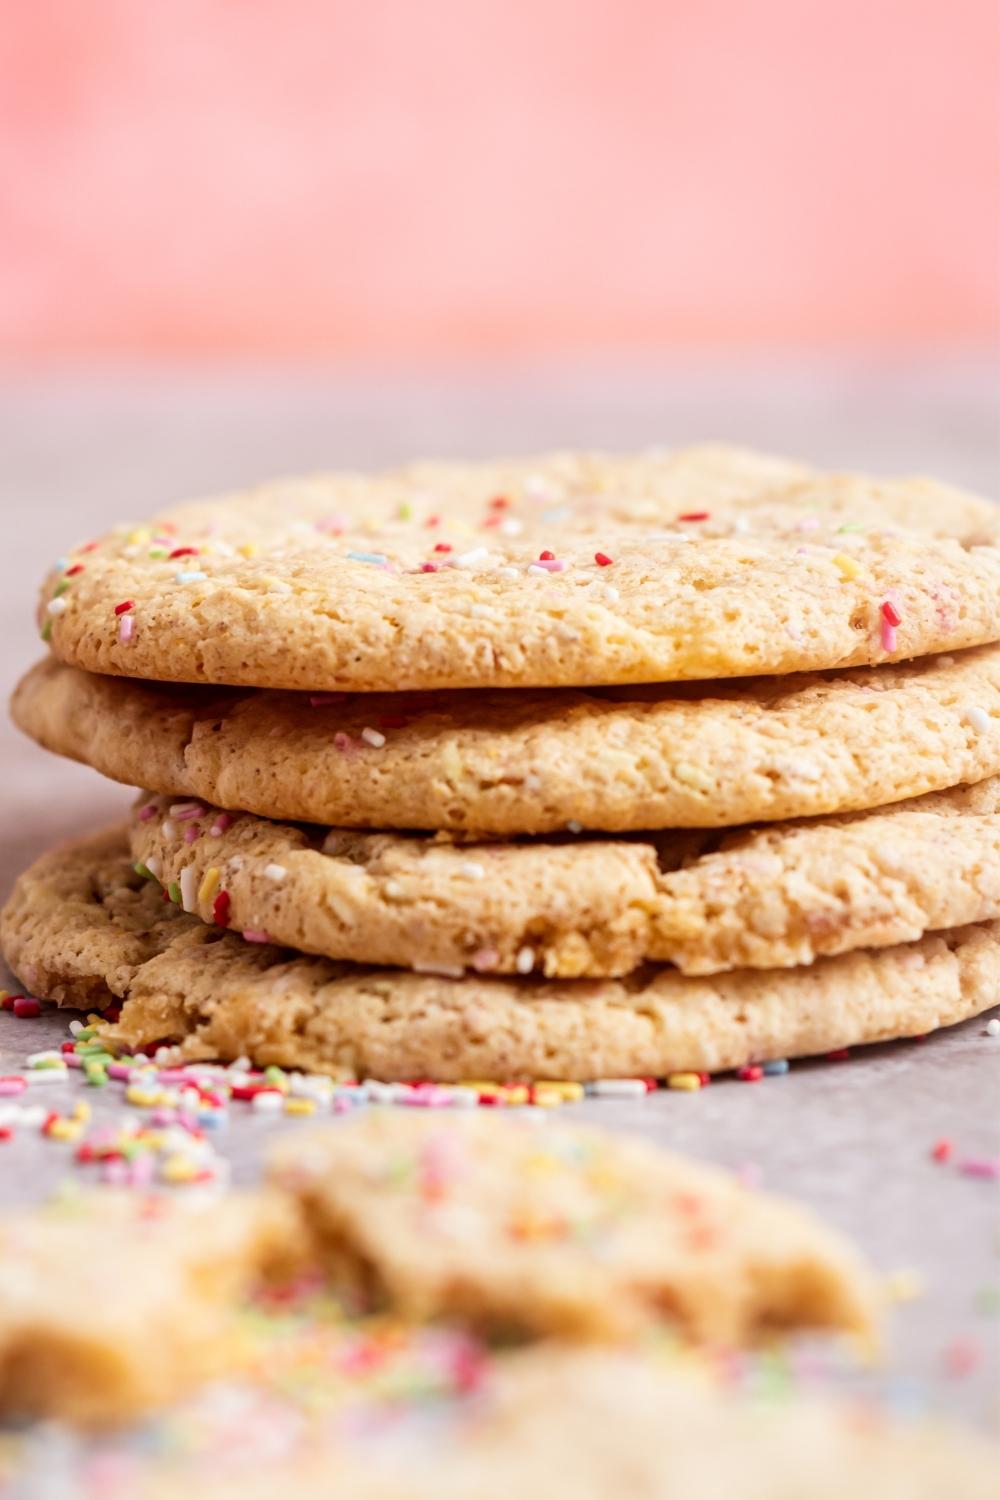 A stack of four funfetti cookies with rainbow sprinkles on top and surrounding the stack.